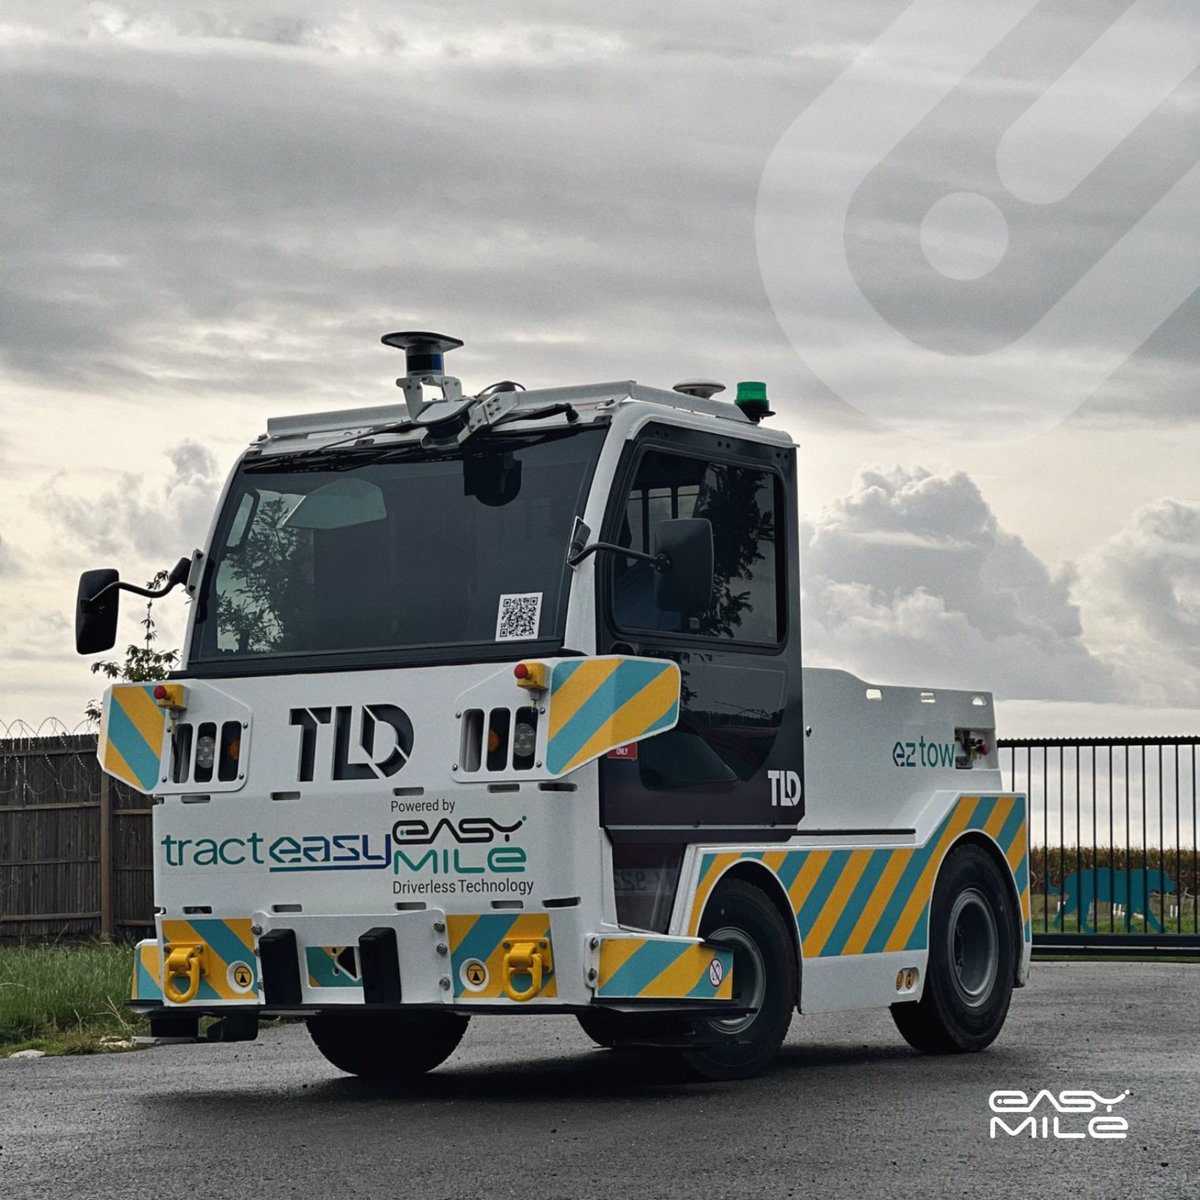 [#News] TractEasy, a collaborative venture between EasyMile and TLD, specializing in intelligent mobility and airport equipment respectively, has partnered with Isitec International to offer the EZTow. Read more here: bit.ly/3Uf91Yi